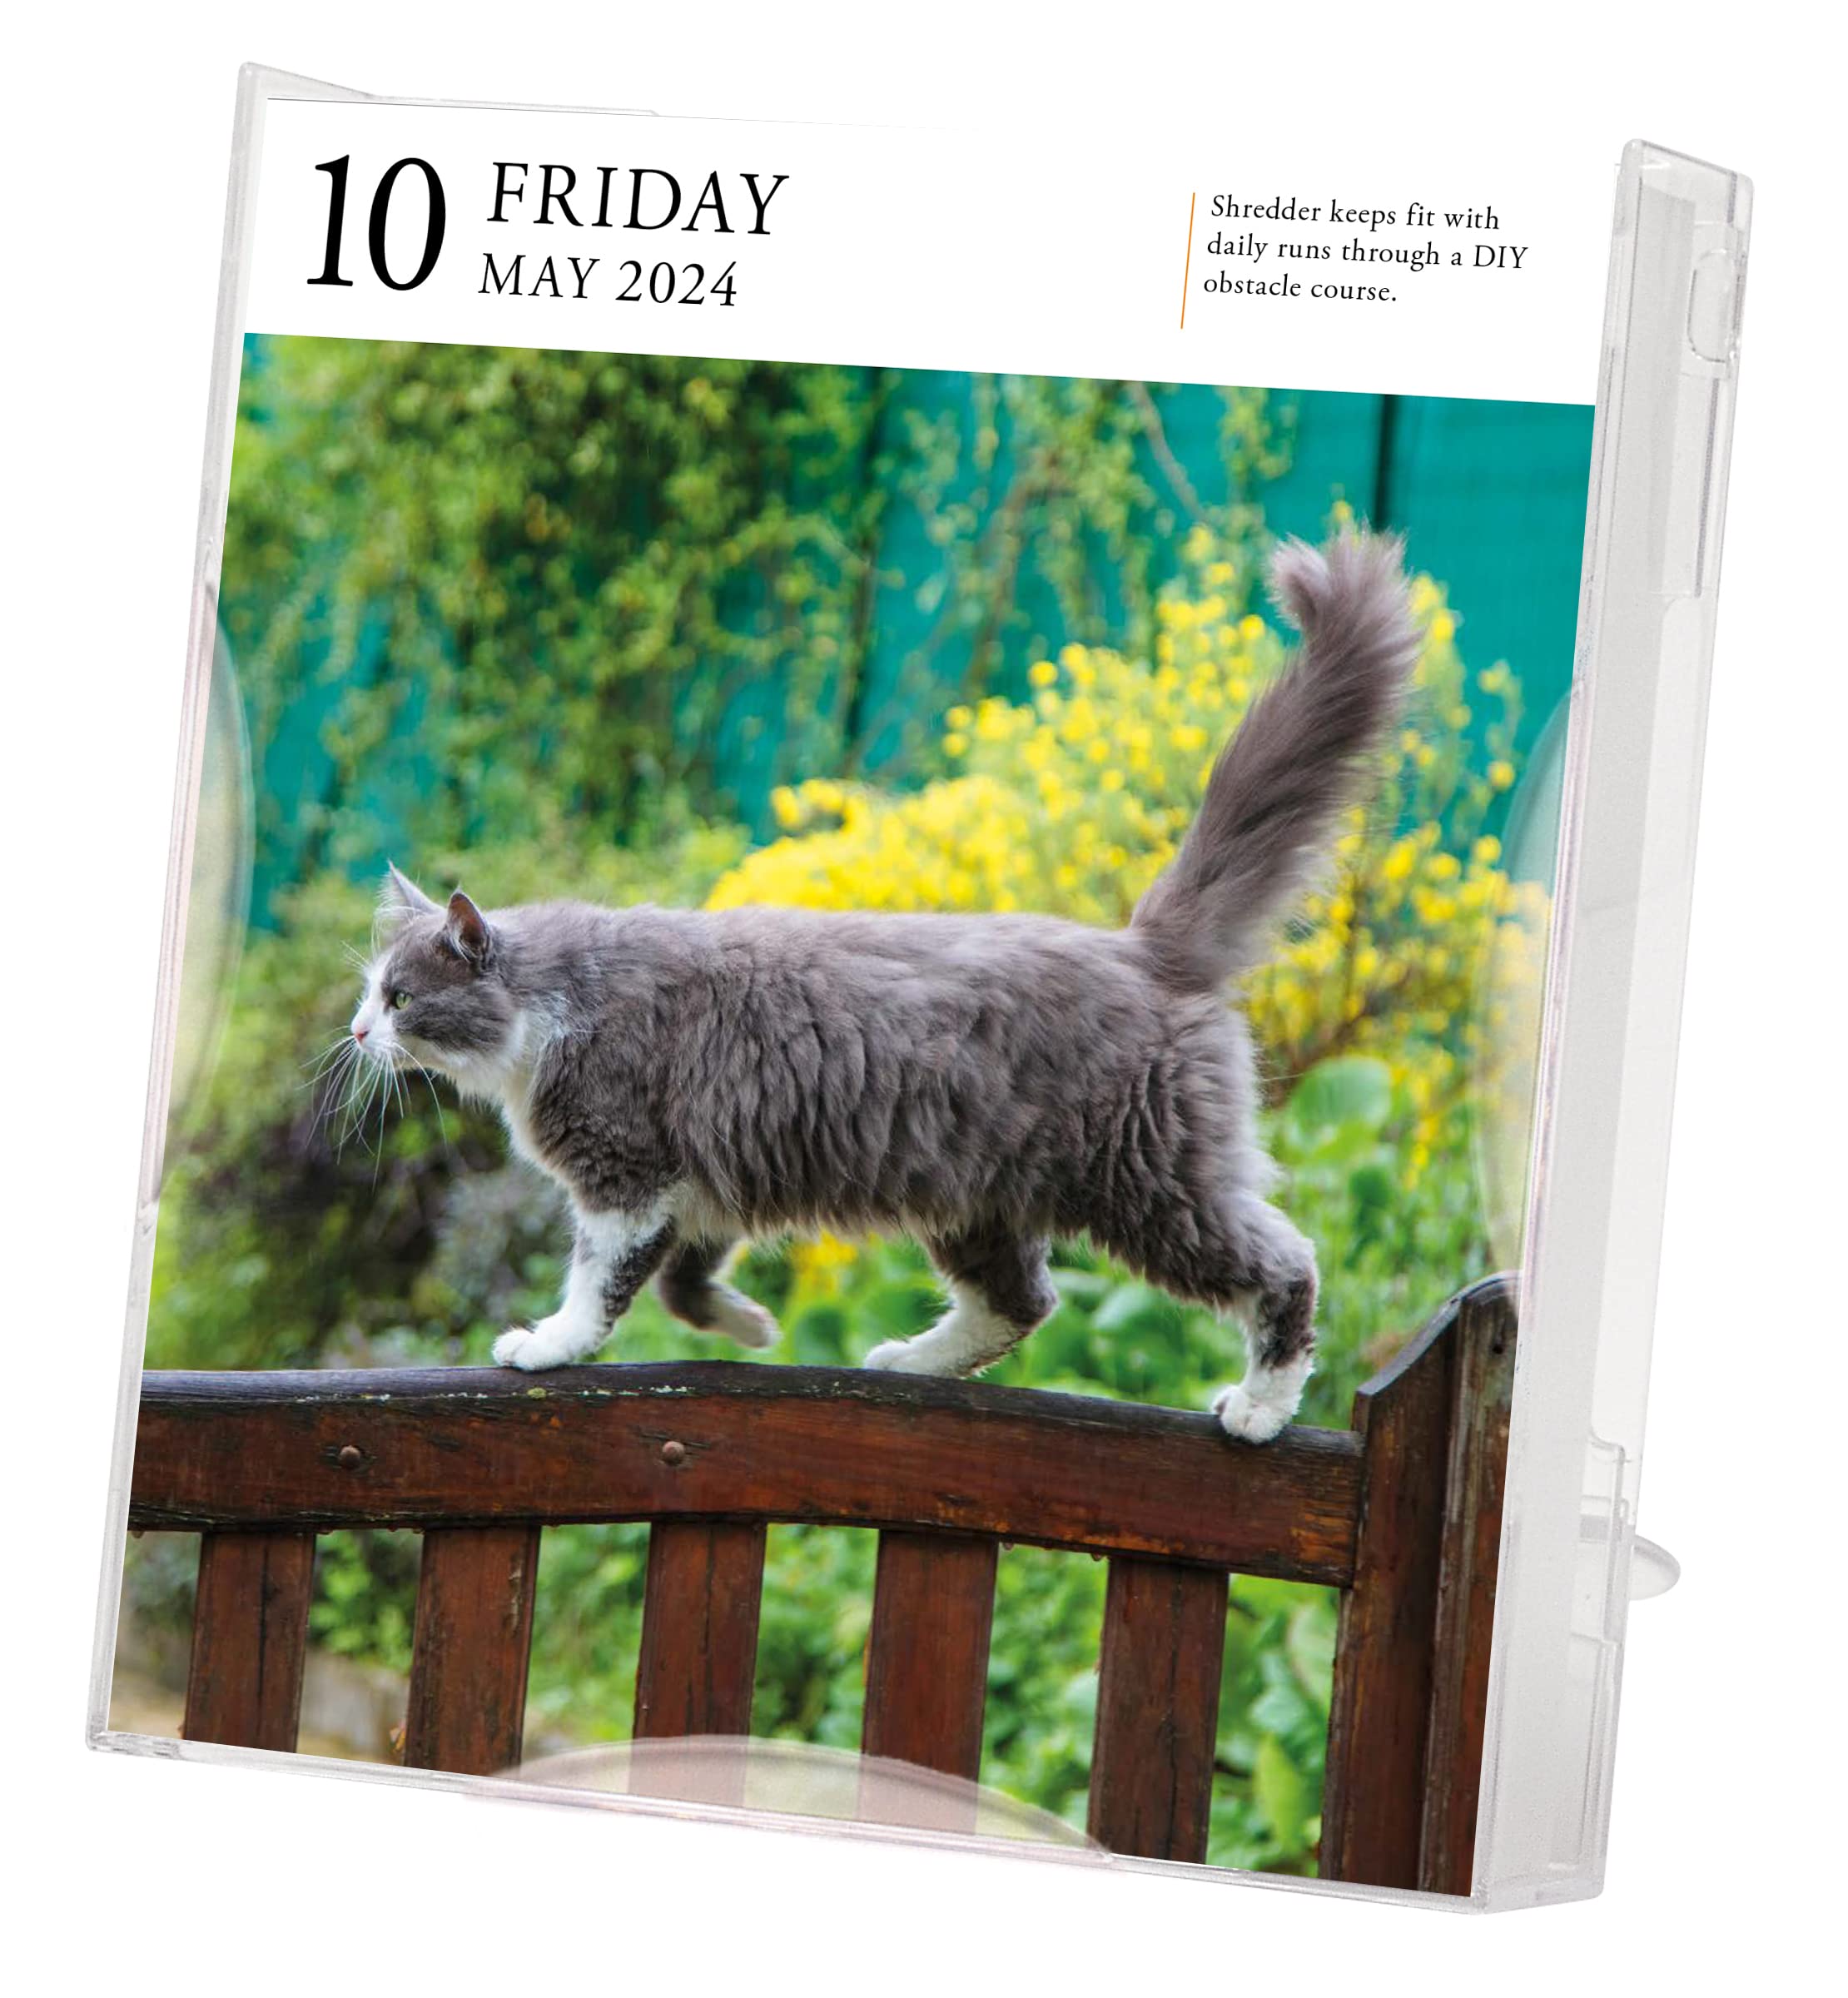 read-workman-calendars-s-book-cat-page-a-day-gallery-calendar-2020-published-by-workman